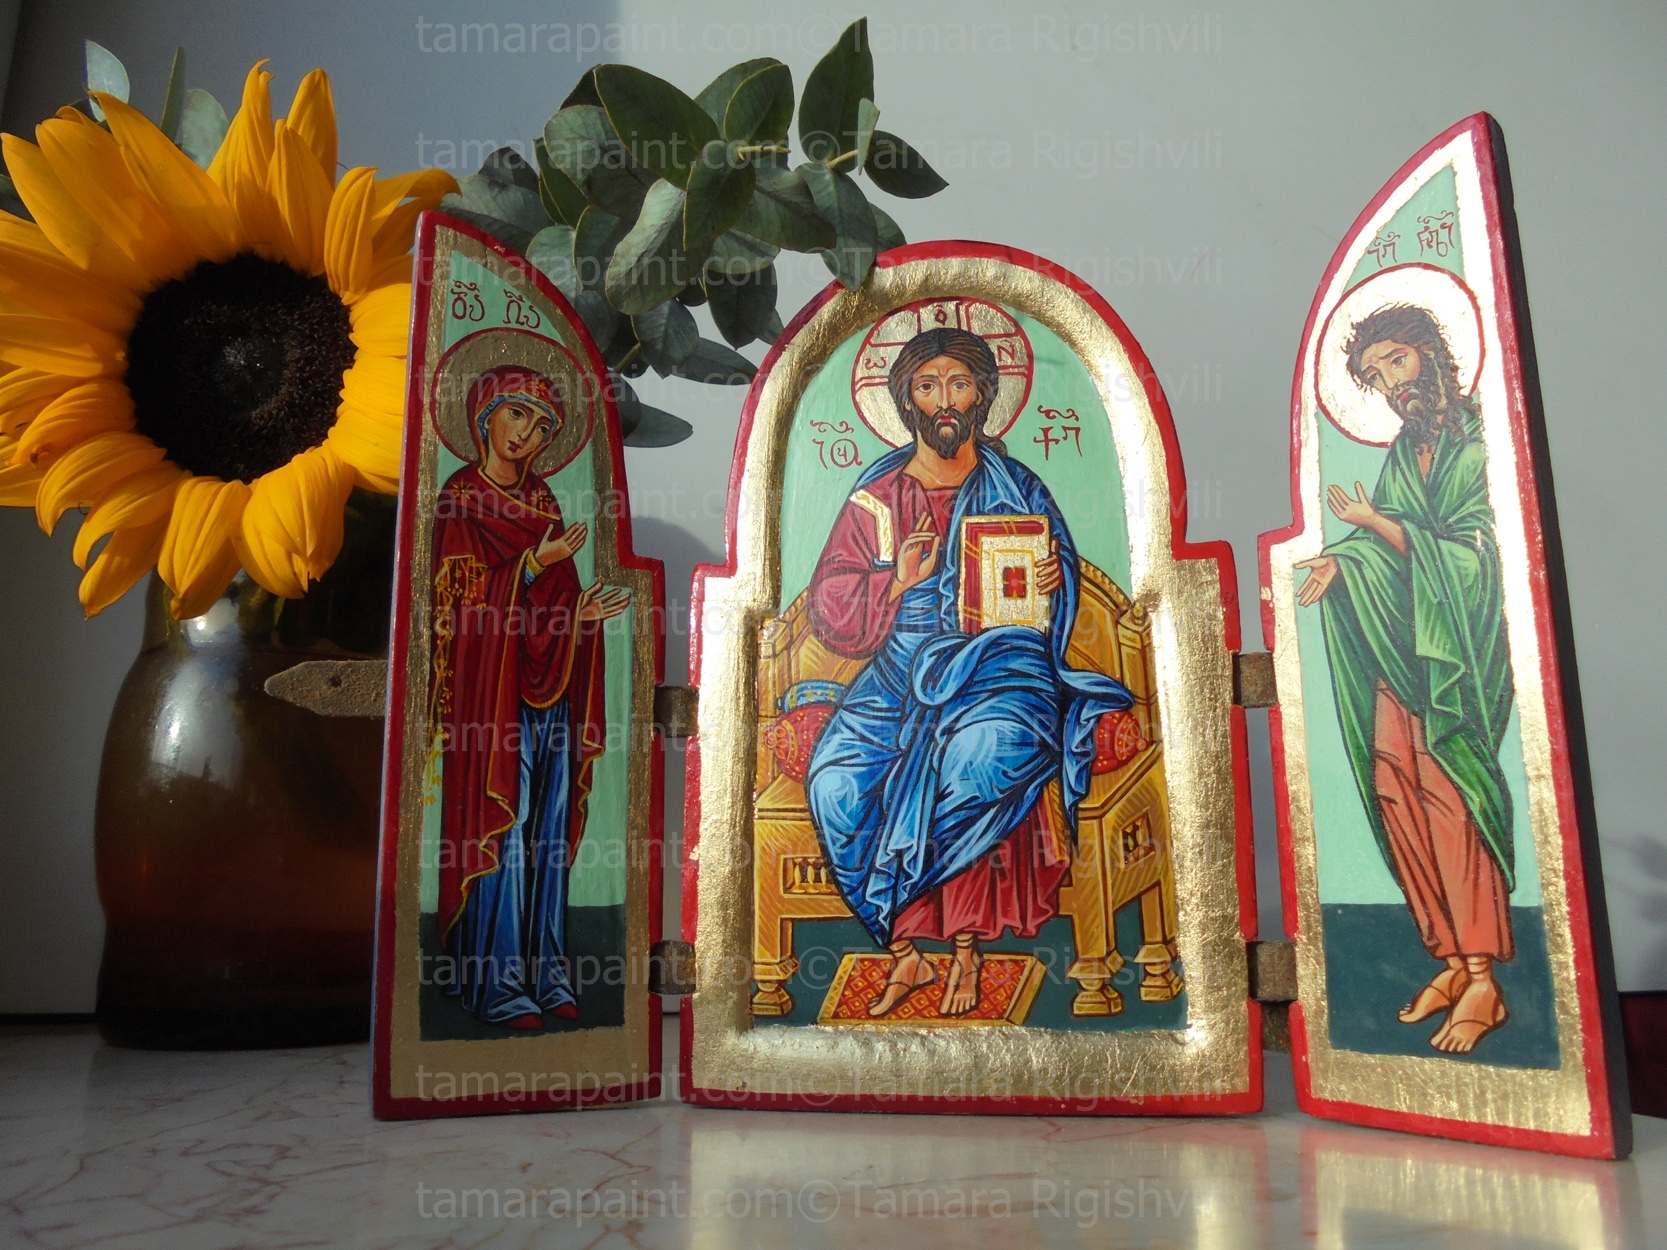 Buy Travellers icon-tryptich The Saviour Enthroned, Icon handpainted,Tempera, Gold Gilding, original icon painting by artist Tamara Rigishvili 